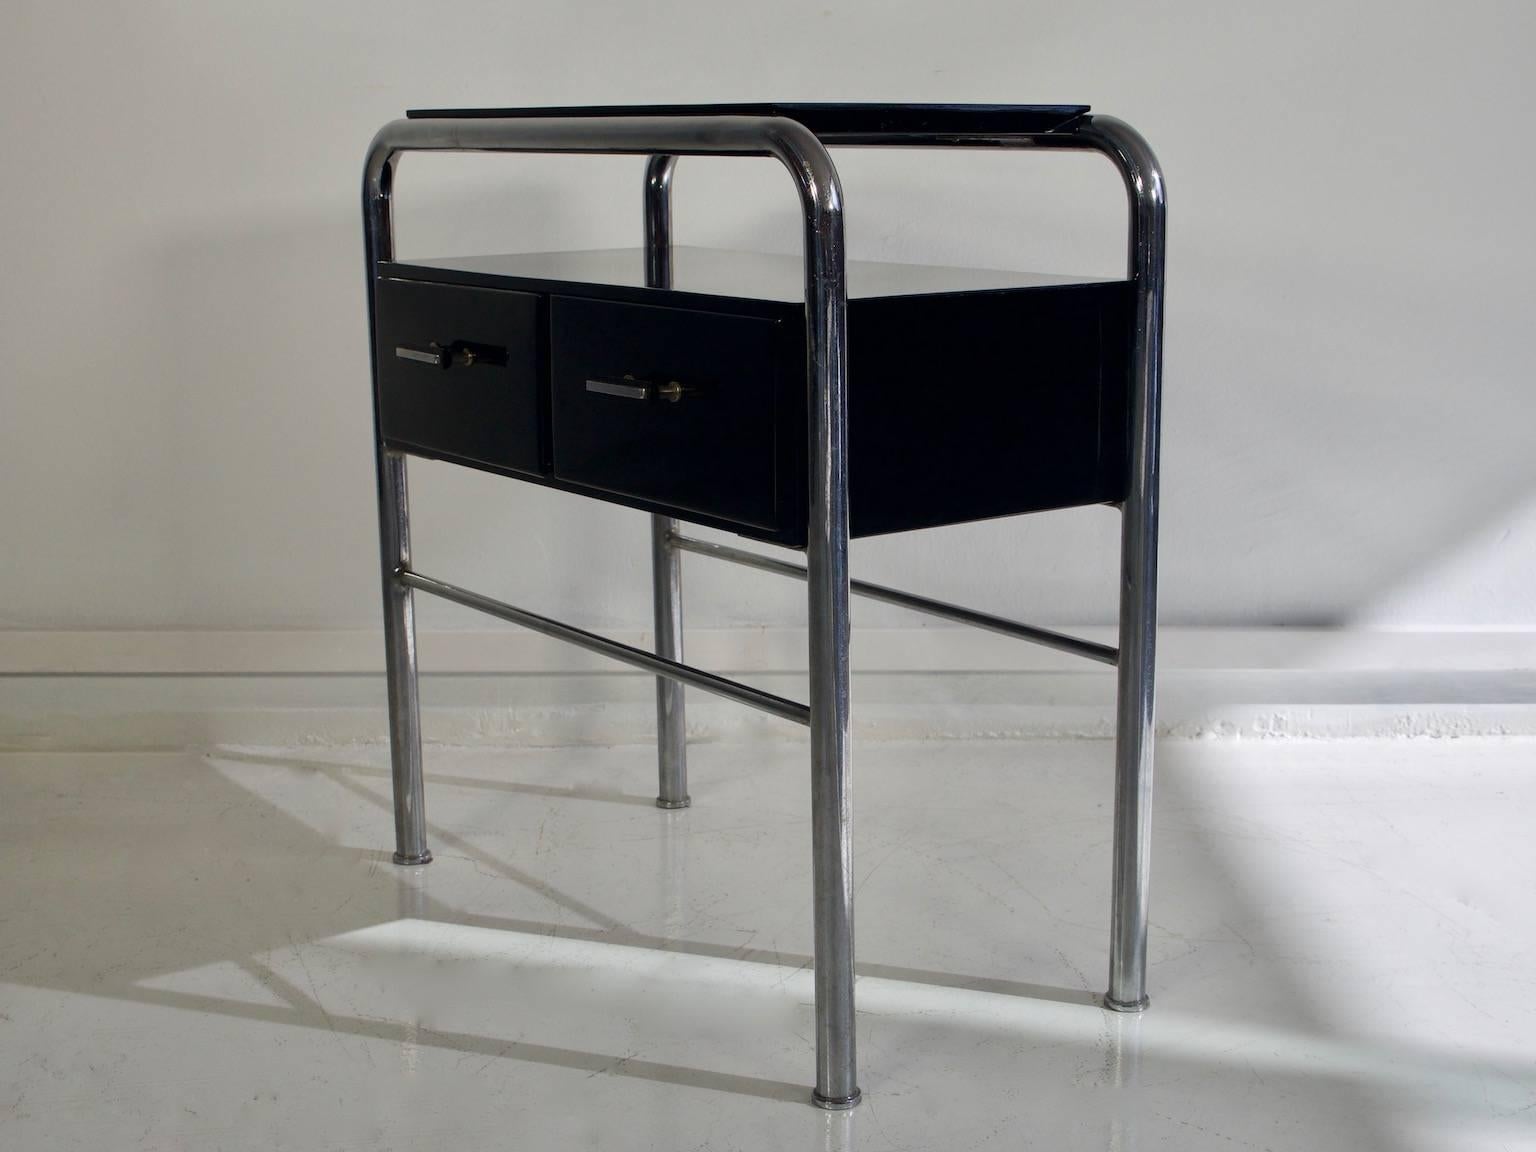 Small Bauhaus side table with pull out drawers in black lacquered wood and steel tube structure, 1930s. The wood has been restored and the tubes are in original vintage condition.